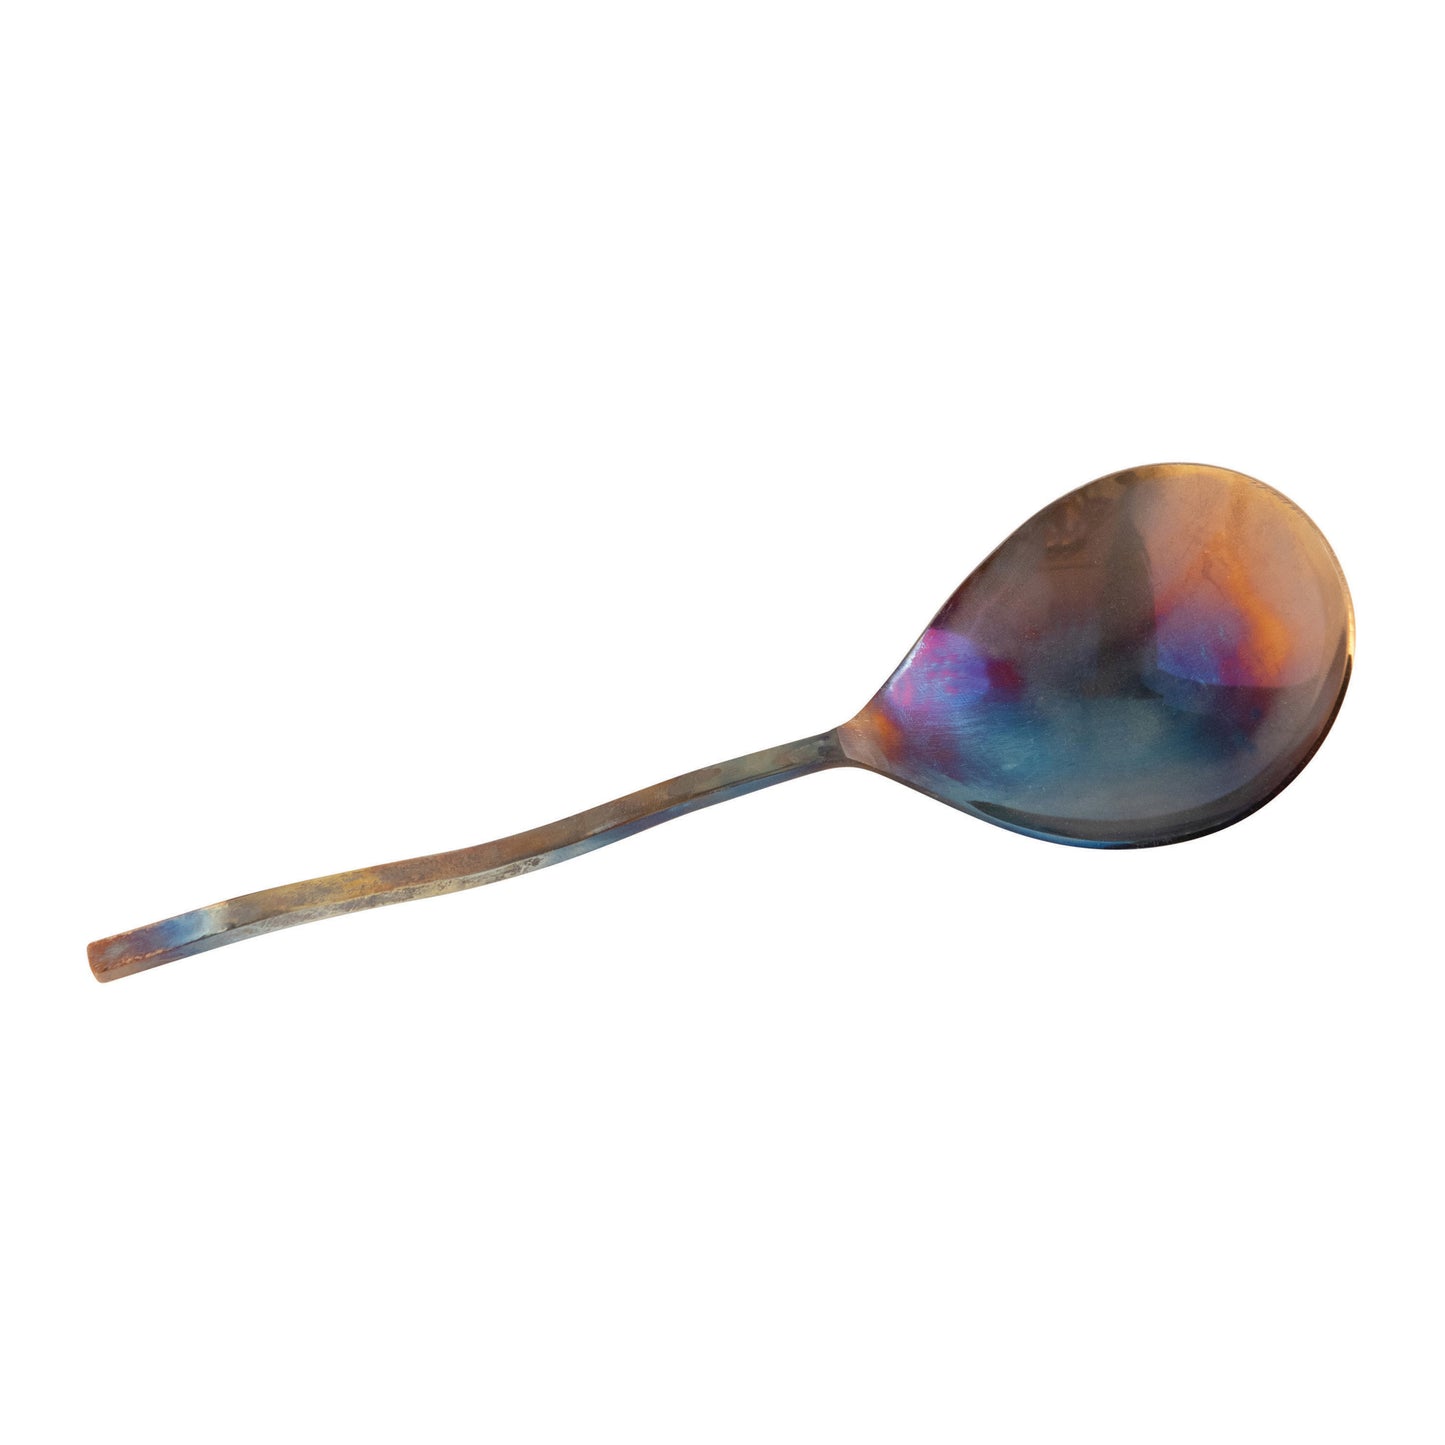 Hand-Forged Stainless Steel Serving Spoon